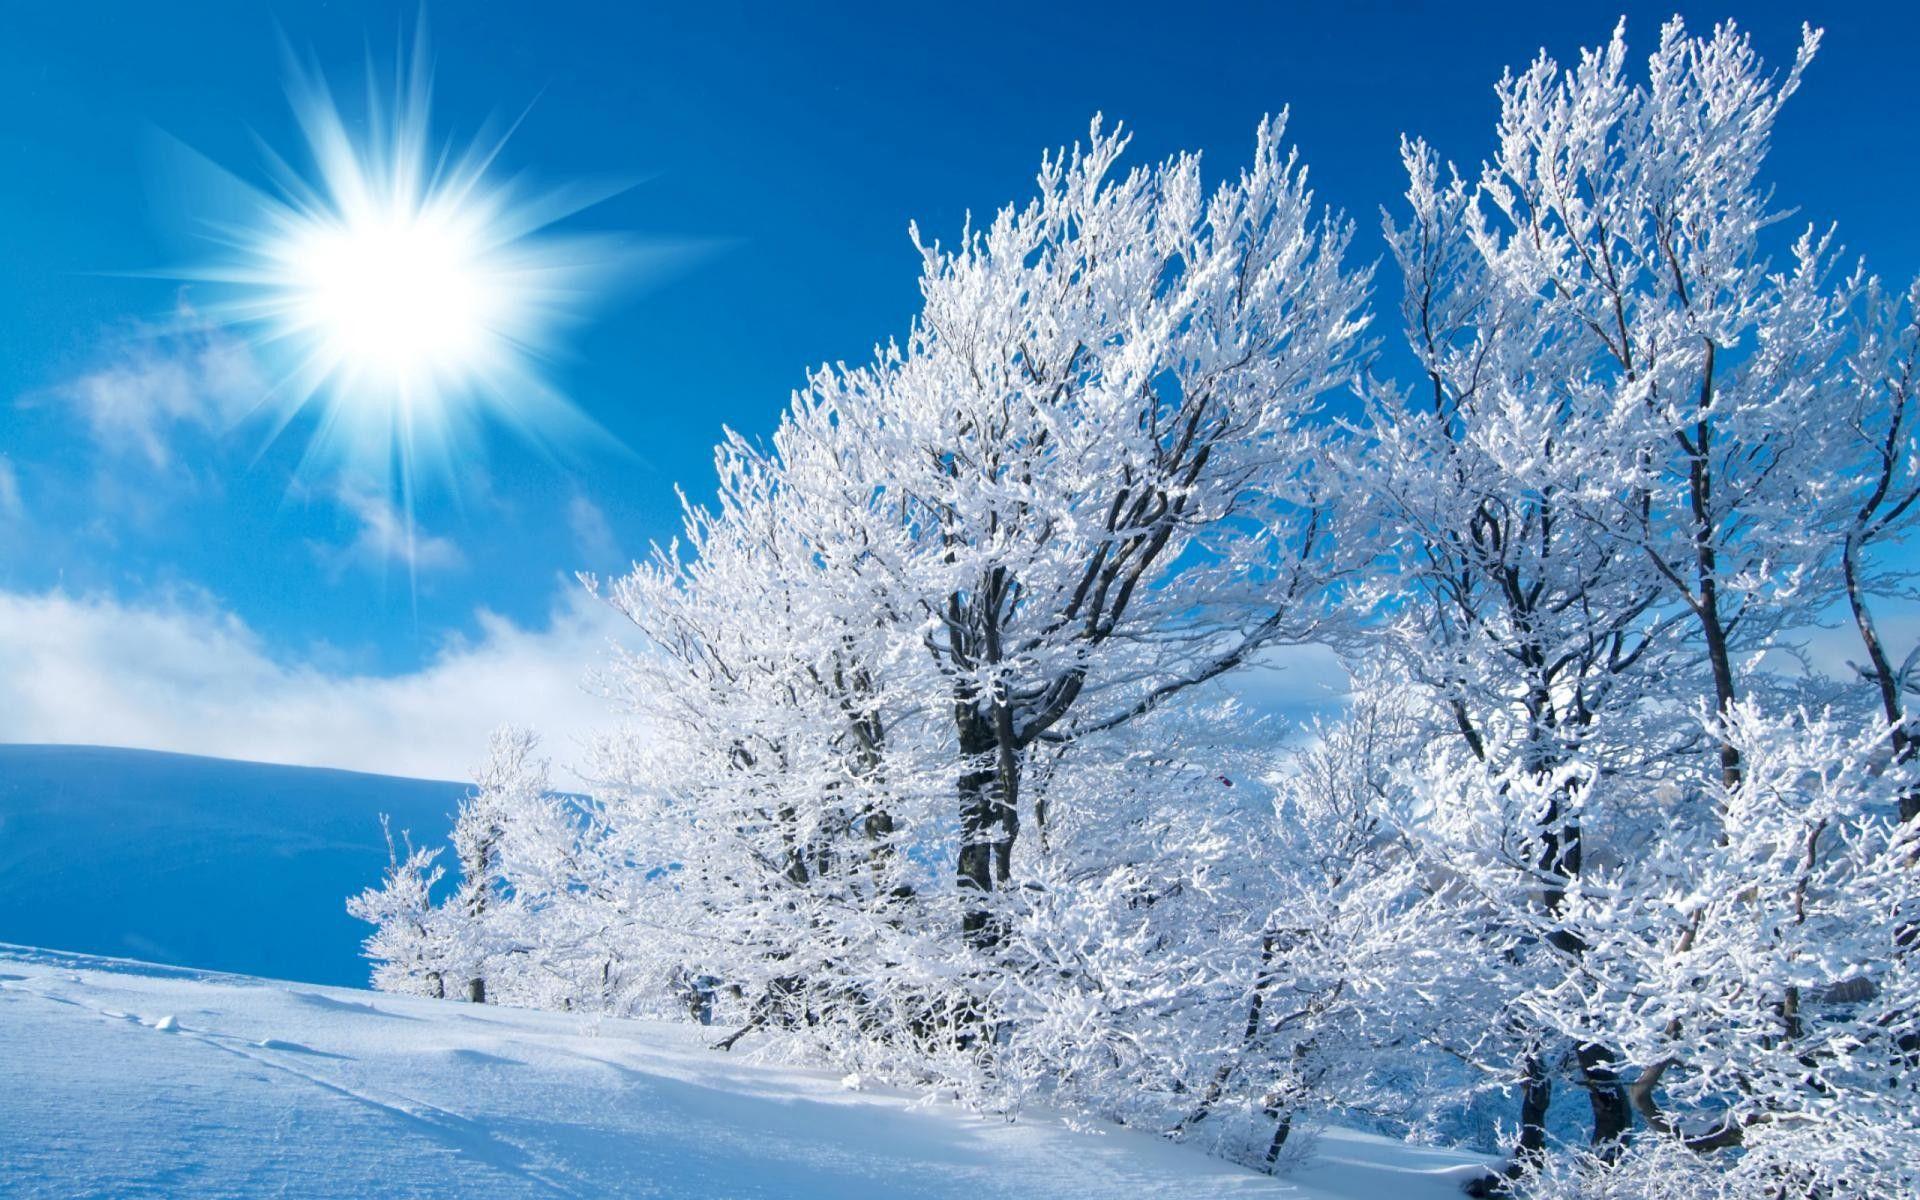 Sunny winter landscape wallpaper and image